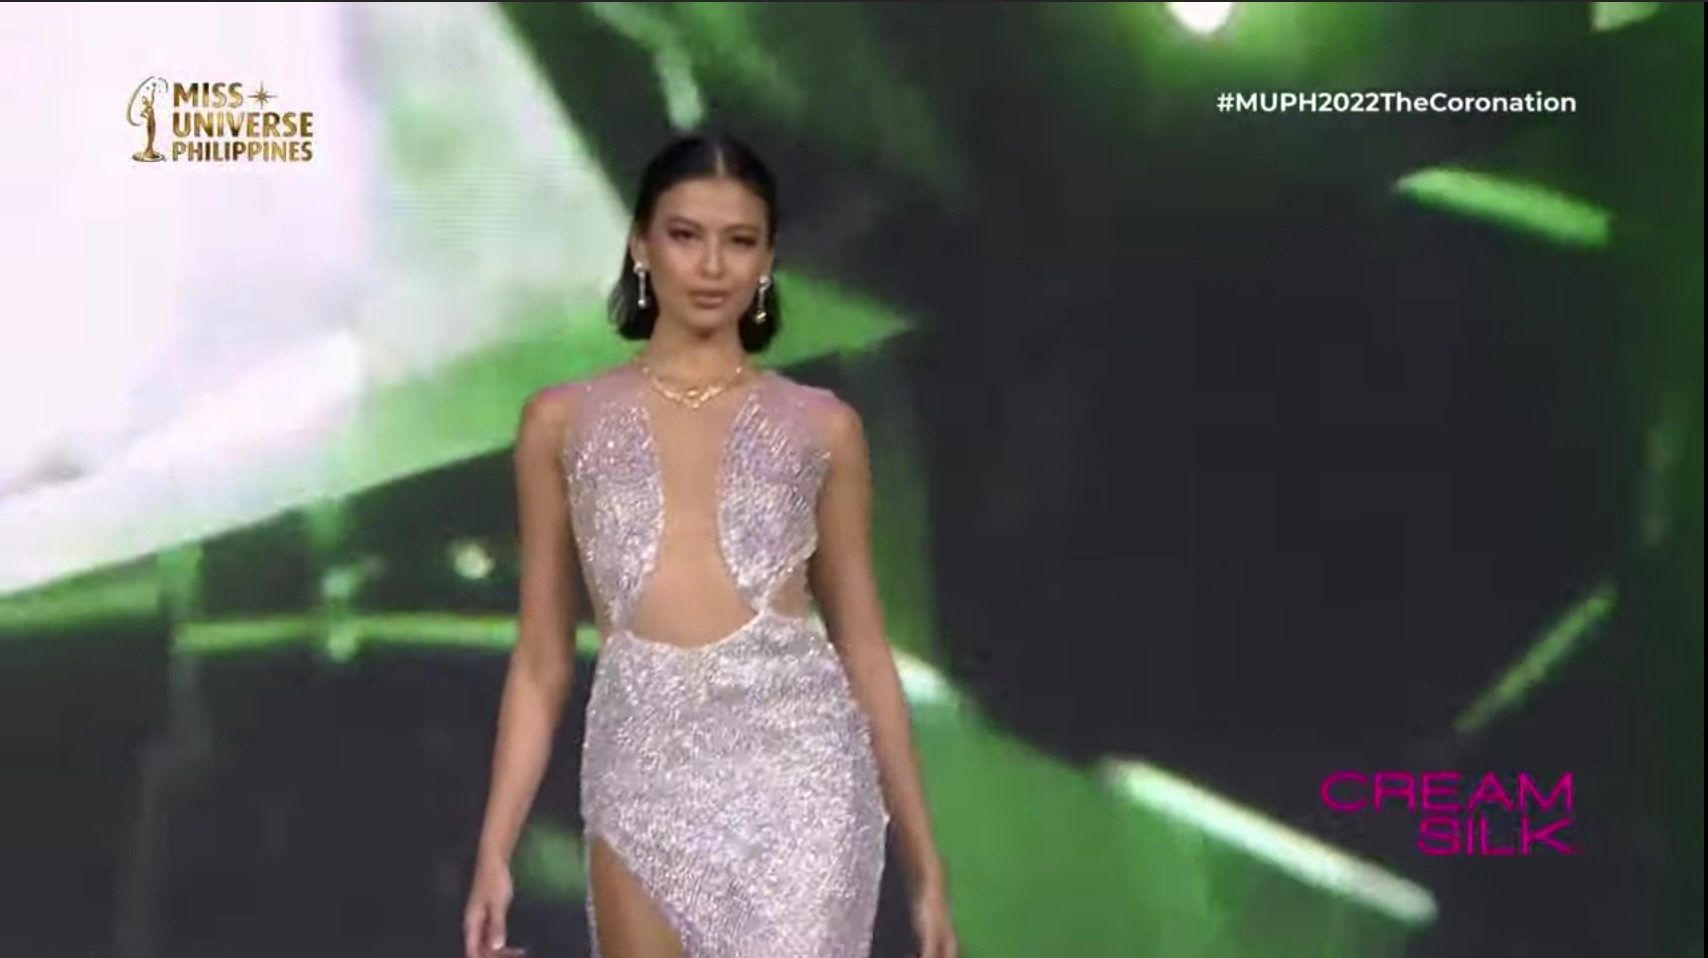 IN PHOTOS: Miss Universe Philippines 2022 evening gown segment